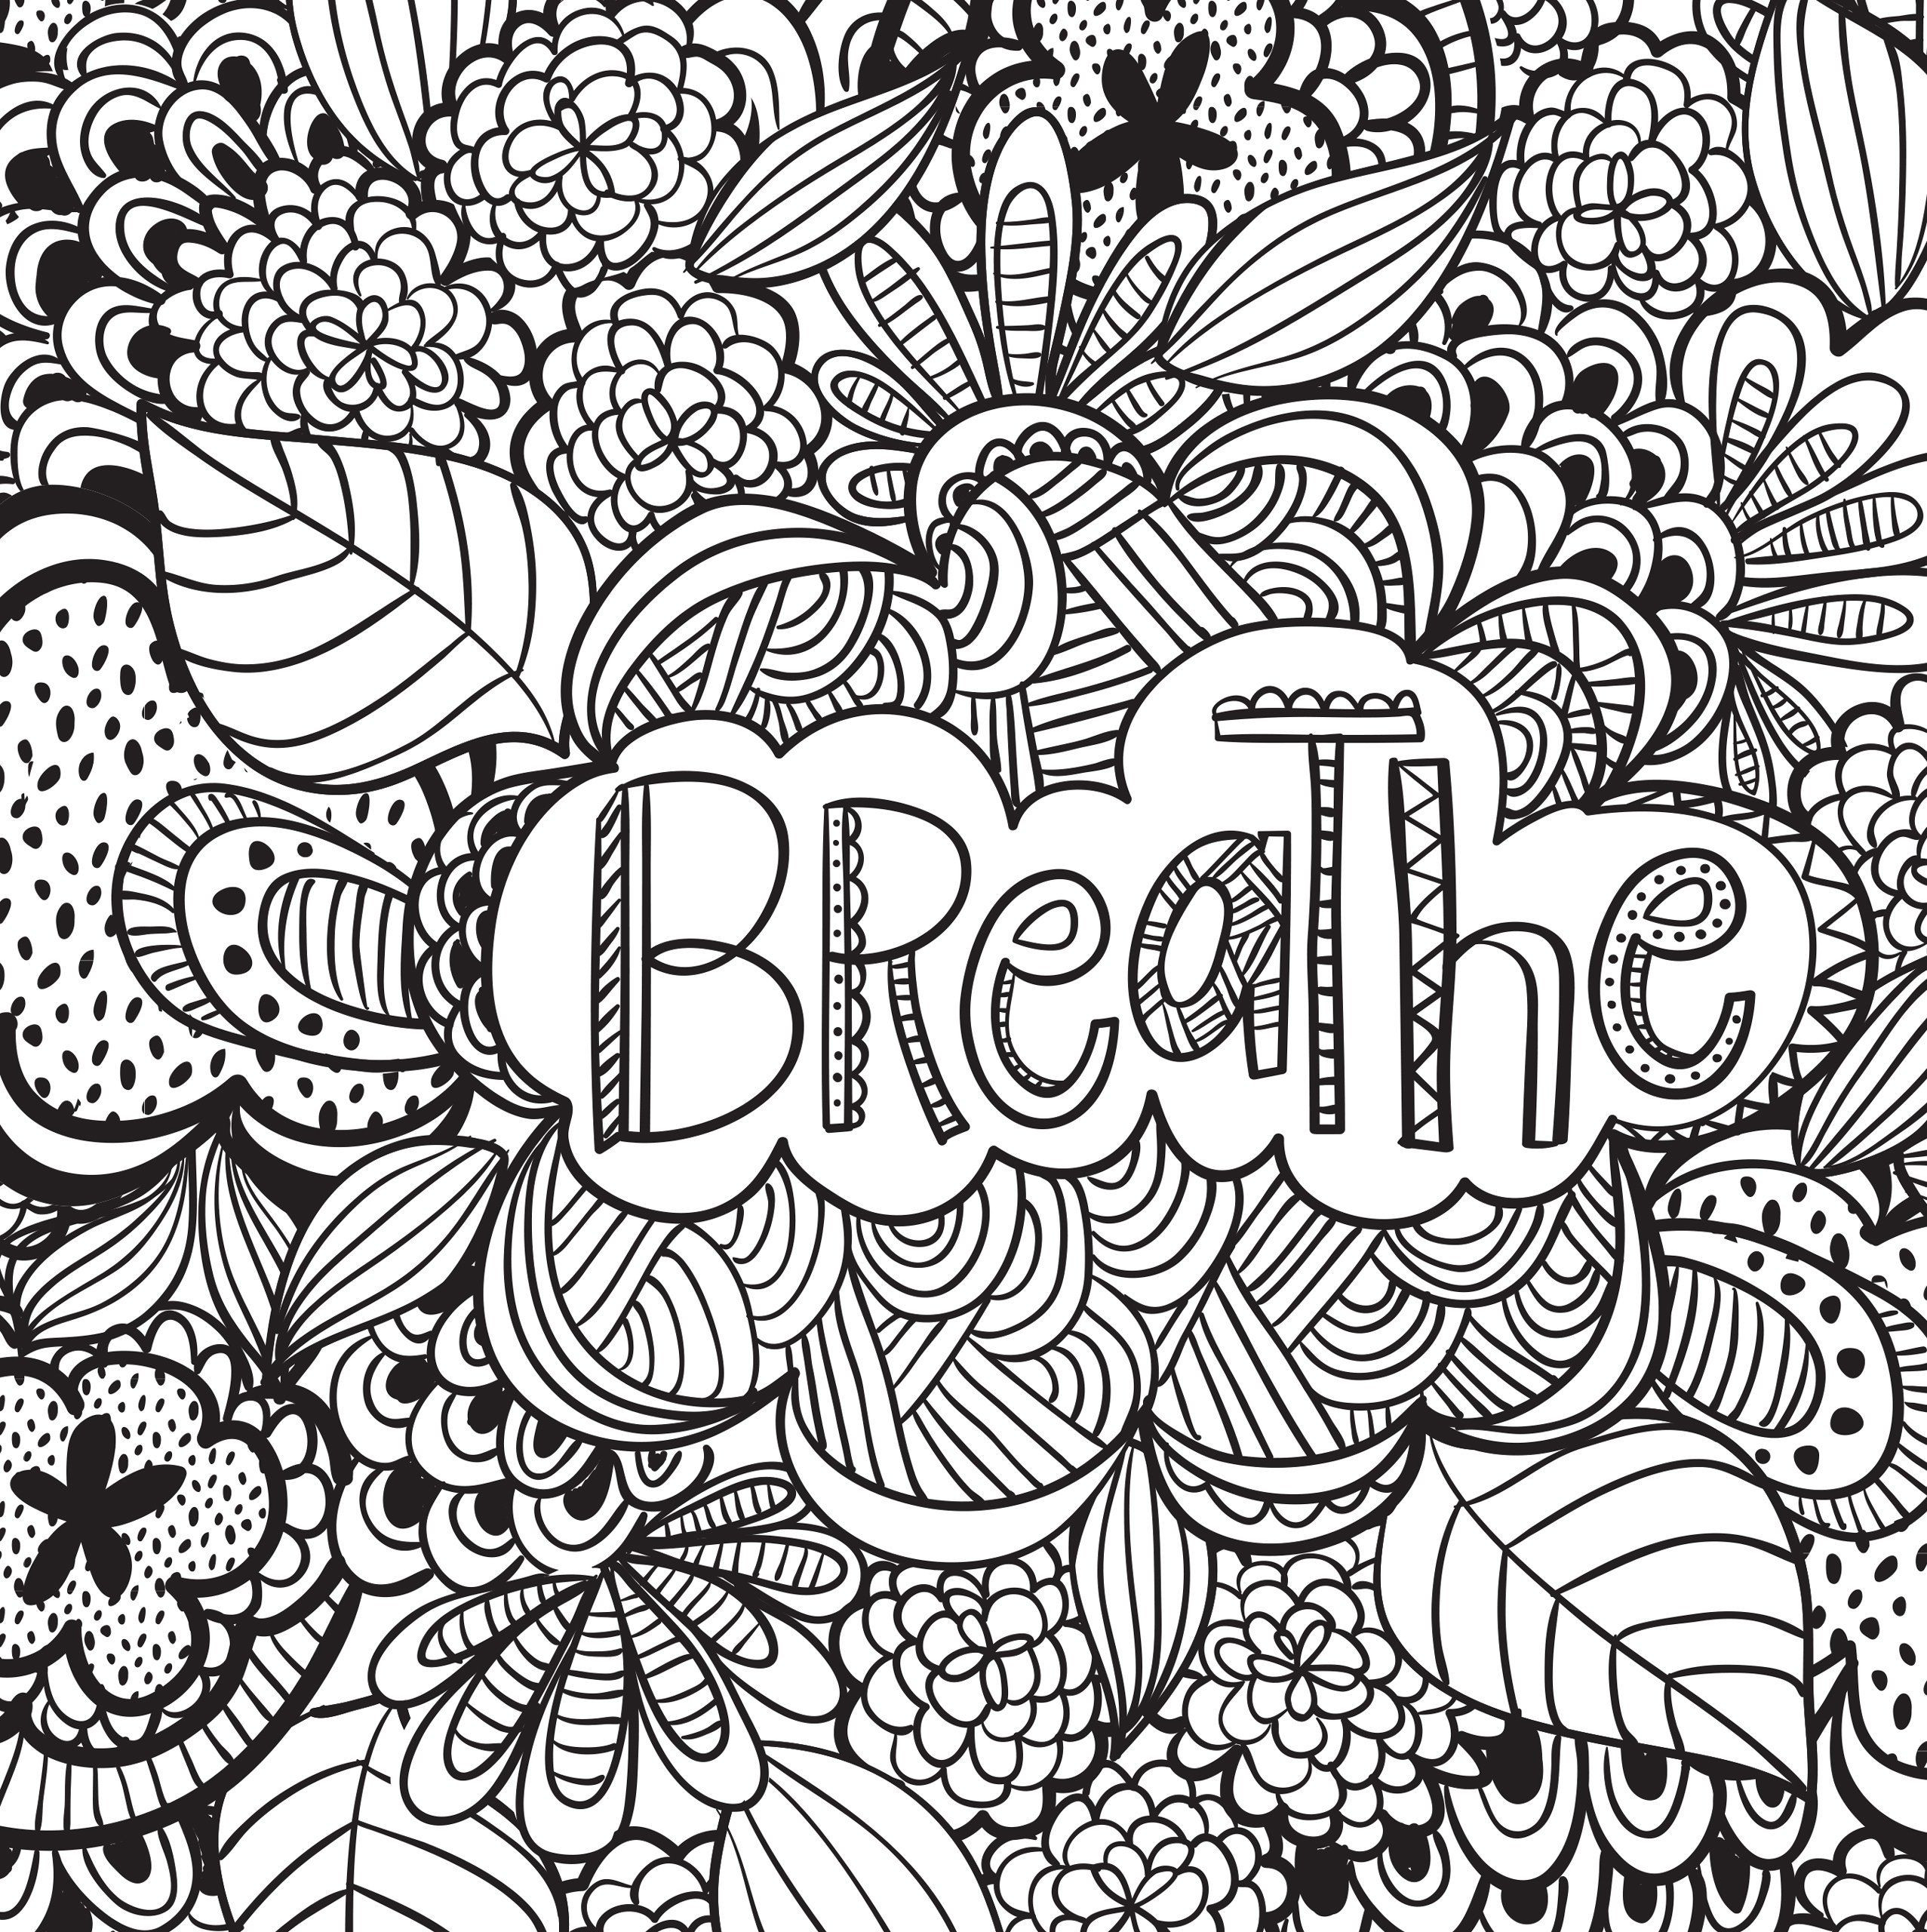 Stress Relief Coloring Pages For Adults
 Joyful Inspiration Adult Coloring Book 31 stress